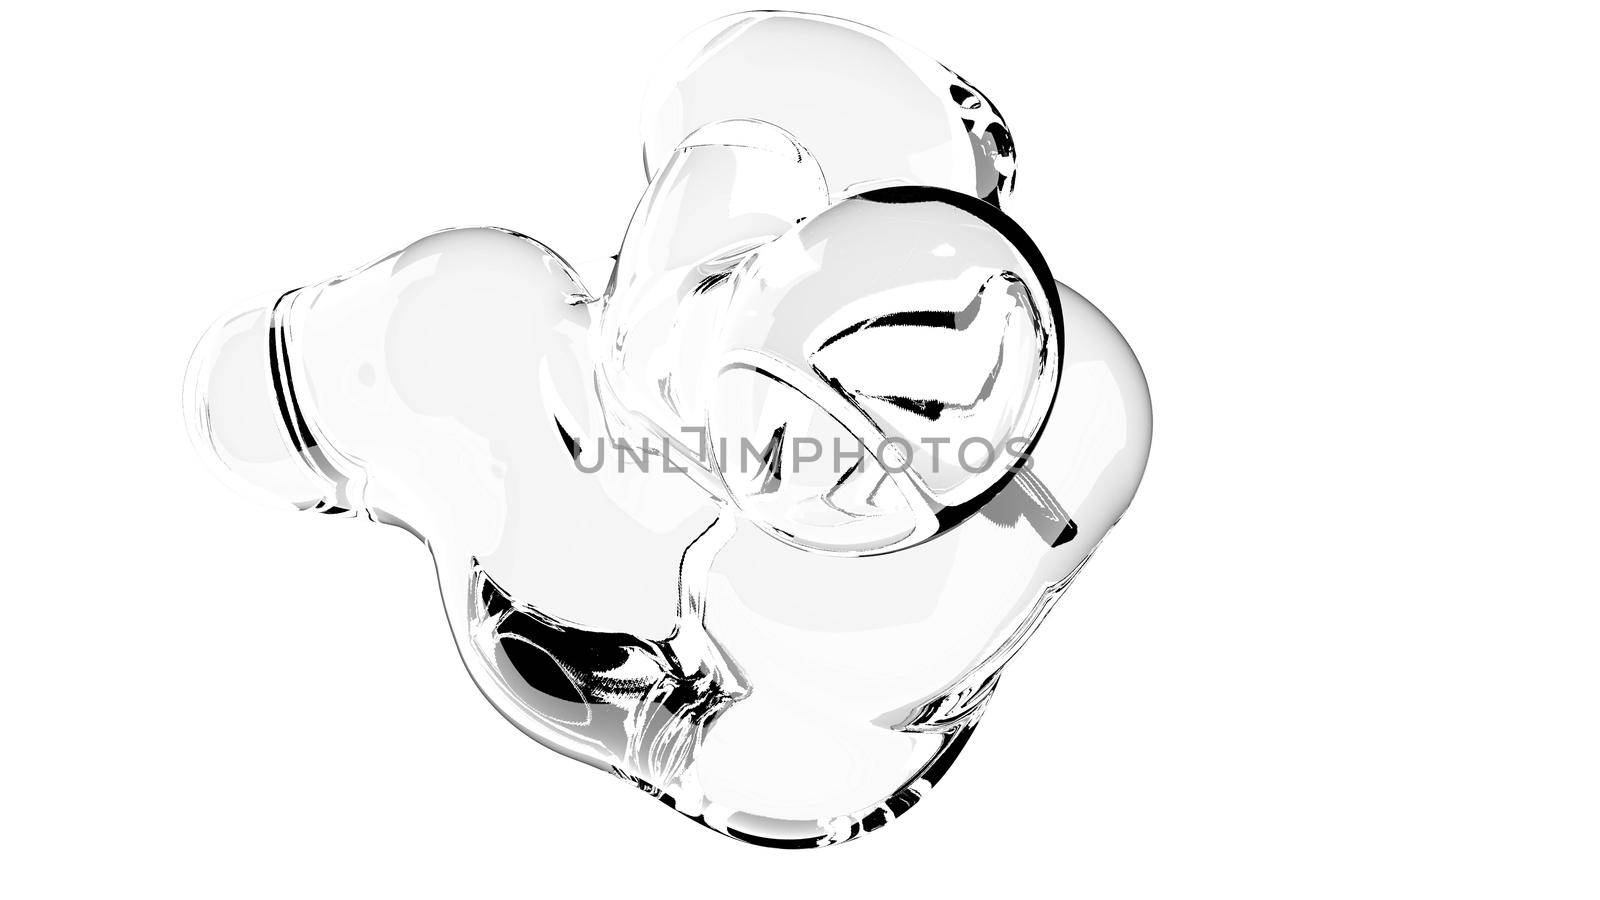 Transparent Cosmetic Sample Medical science Water bubbles Skin care 3d render